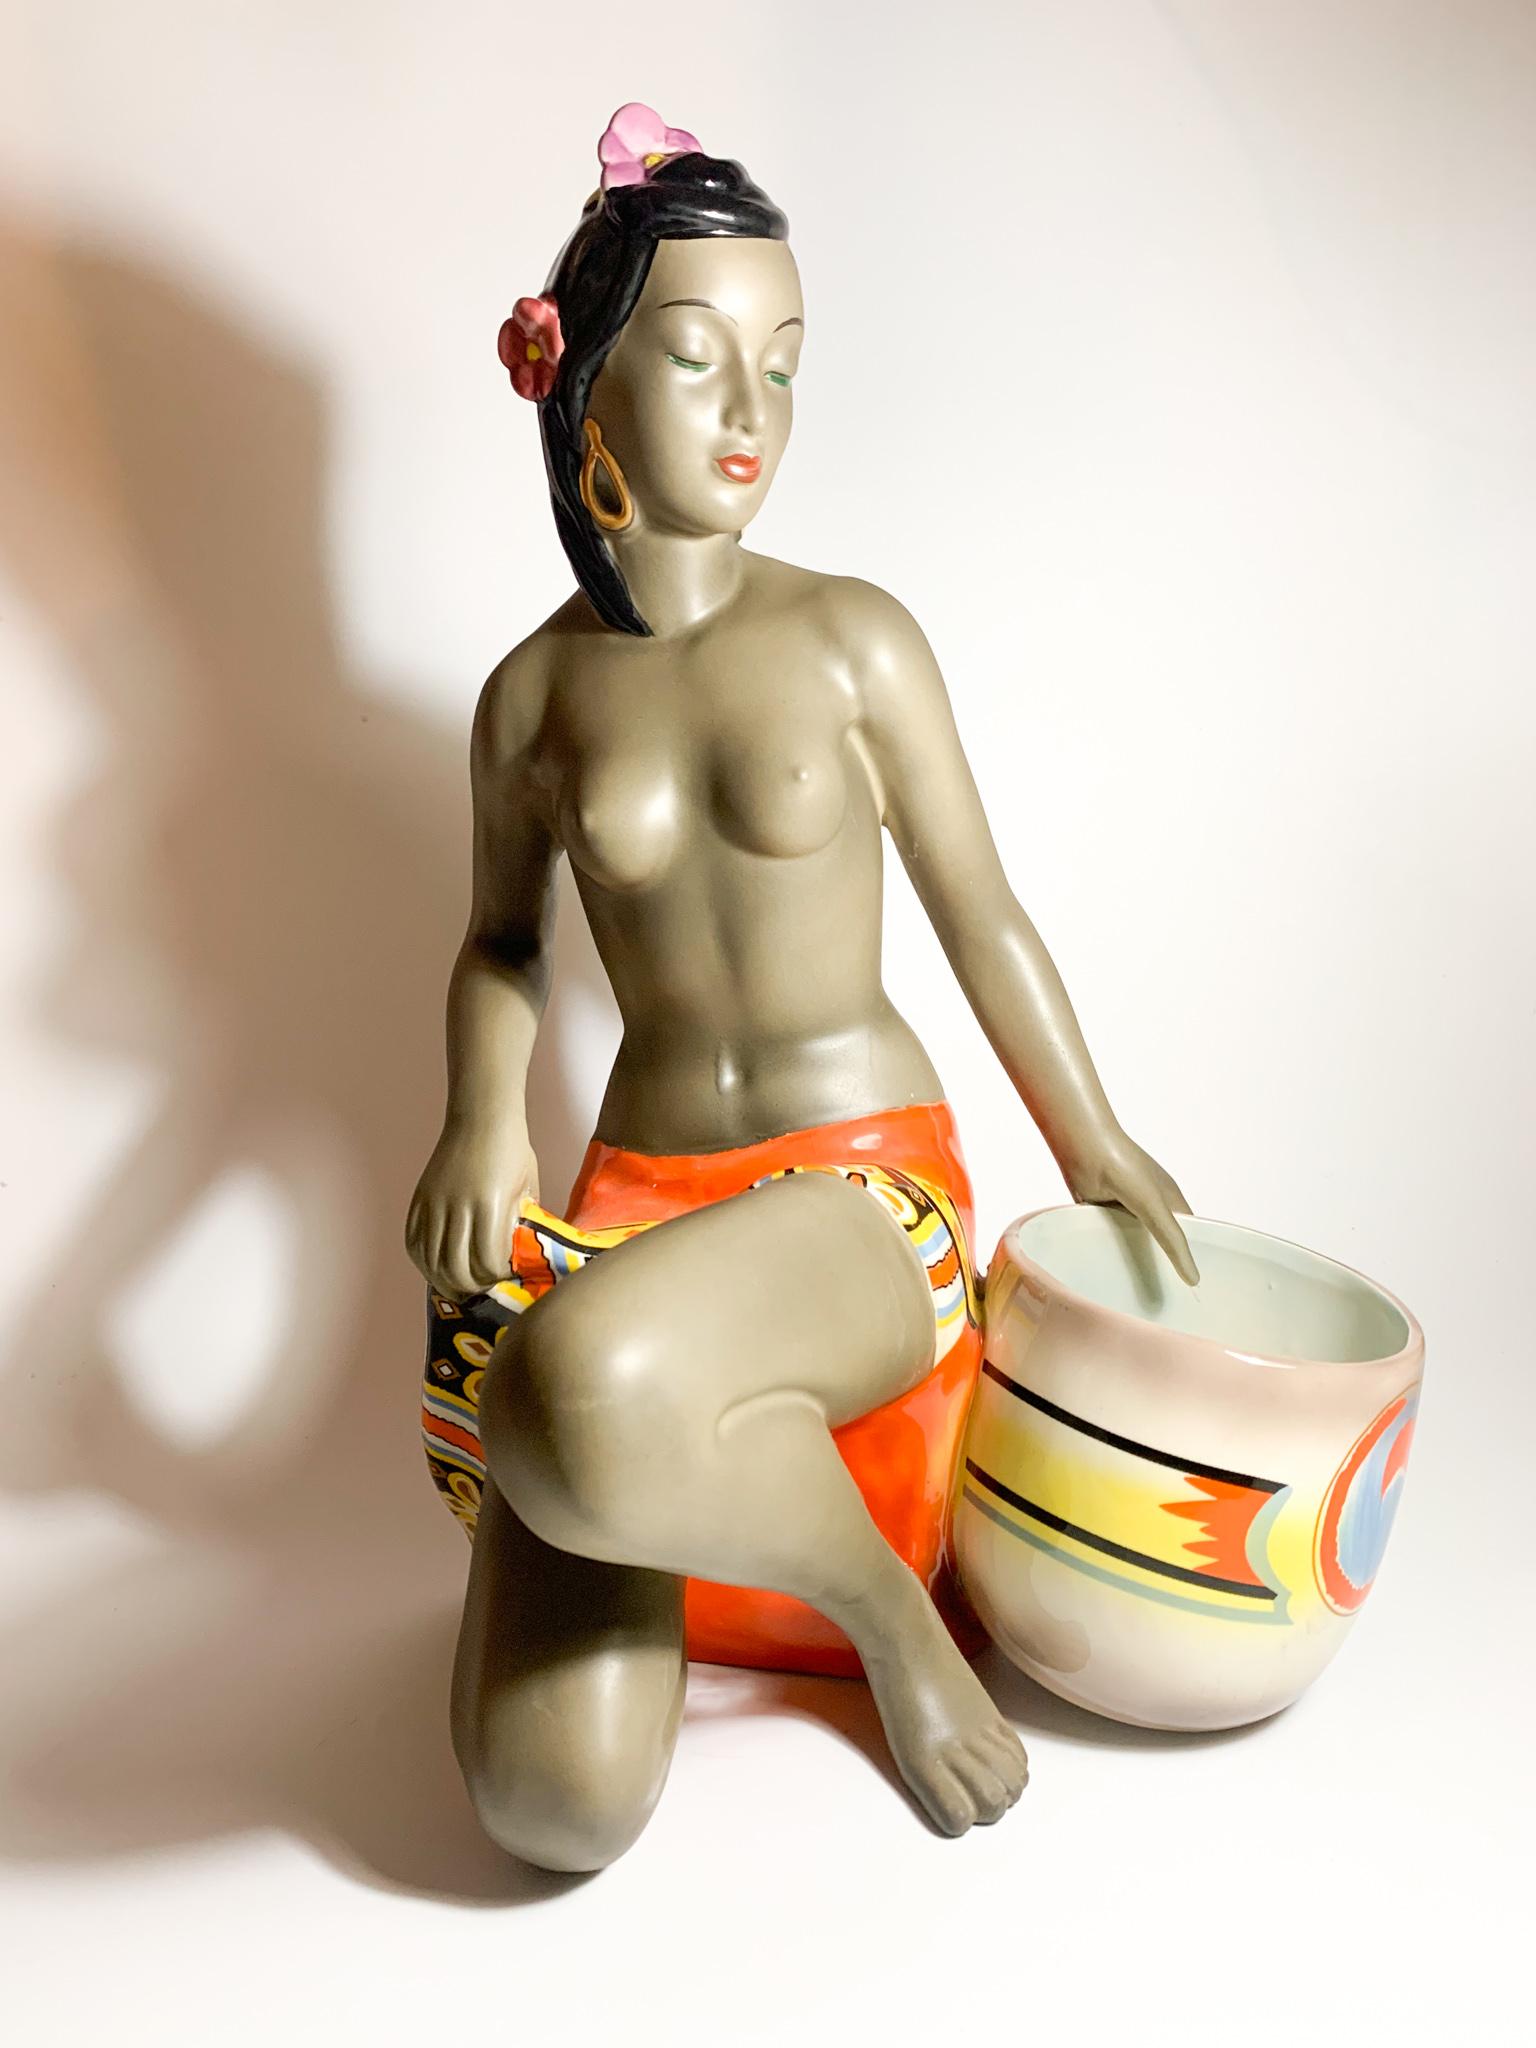 Art Deco Sculpture of an ethnic lady created by CIA Manna Turin in the 1940s

Ø 27 cm diameter cm 20 h cm 41.